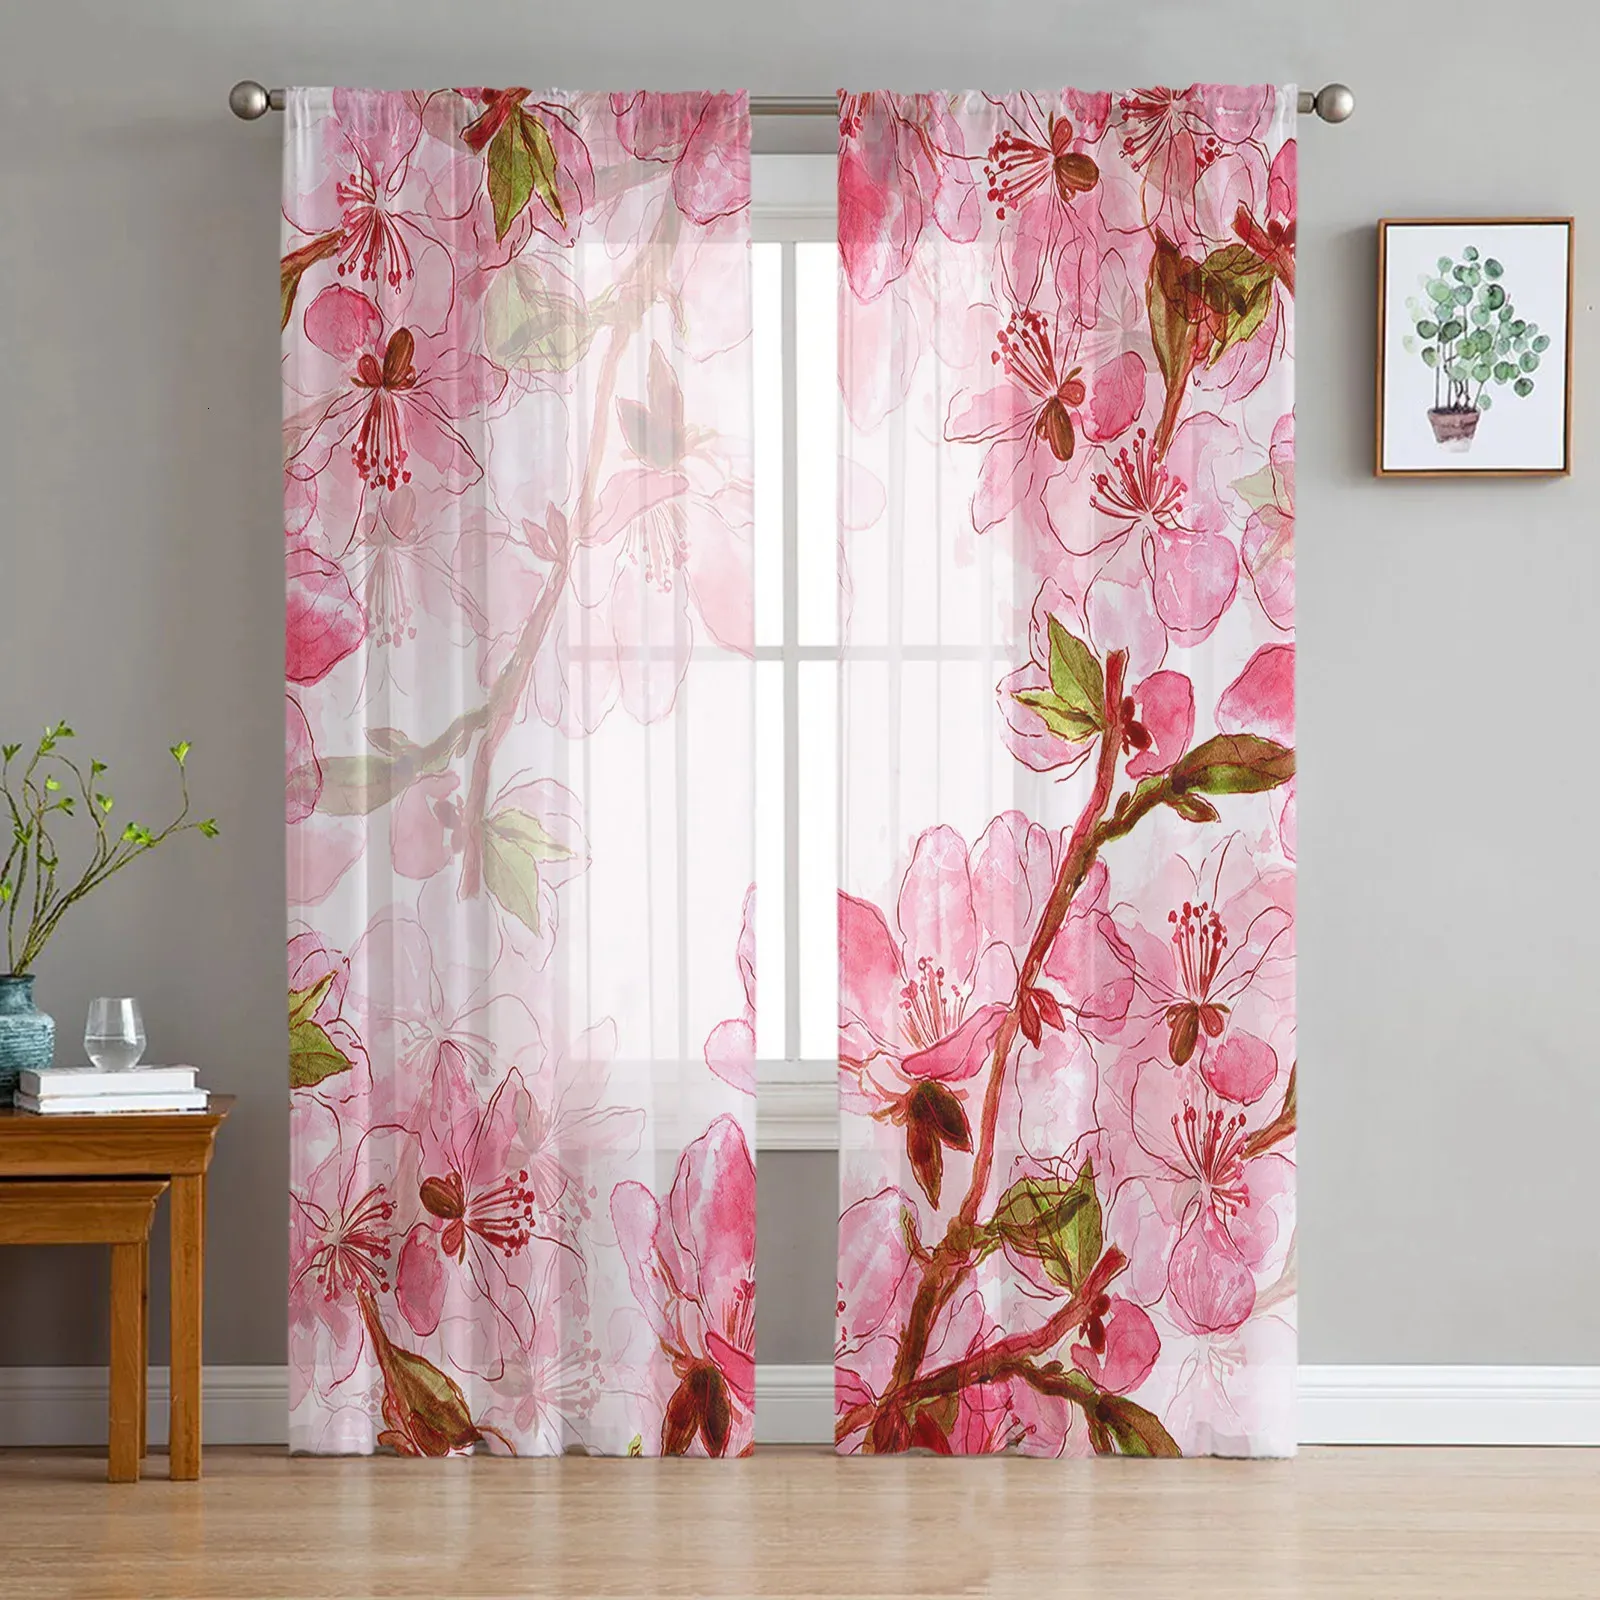 Brown Wood Door Green Pot Red Flowers Voile Sheer Curtains Living Room Window Tulle Curtain Kitchen Bedroom Drapes Home Decor 231227